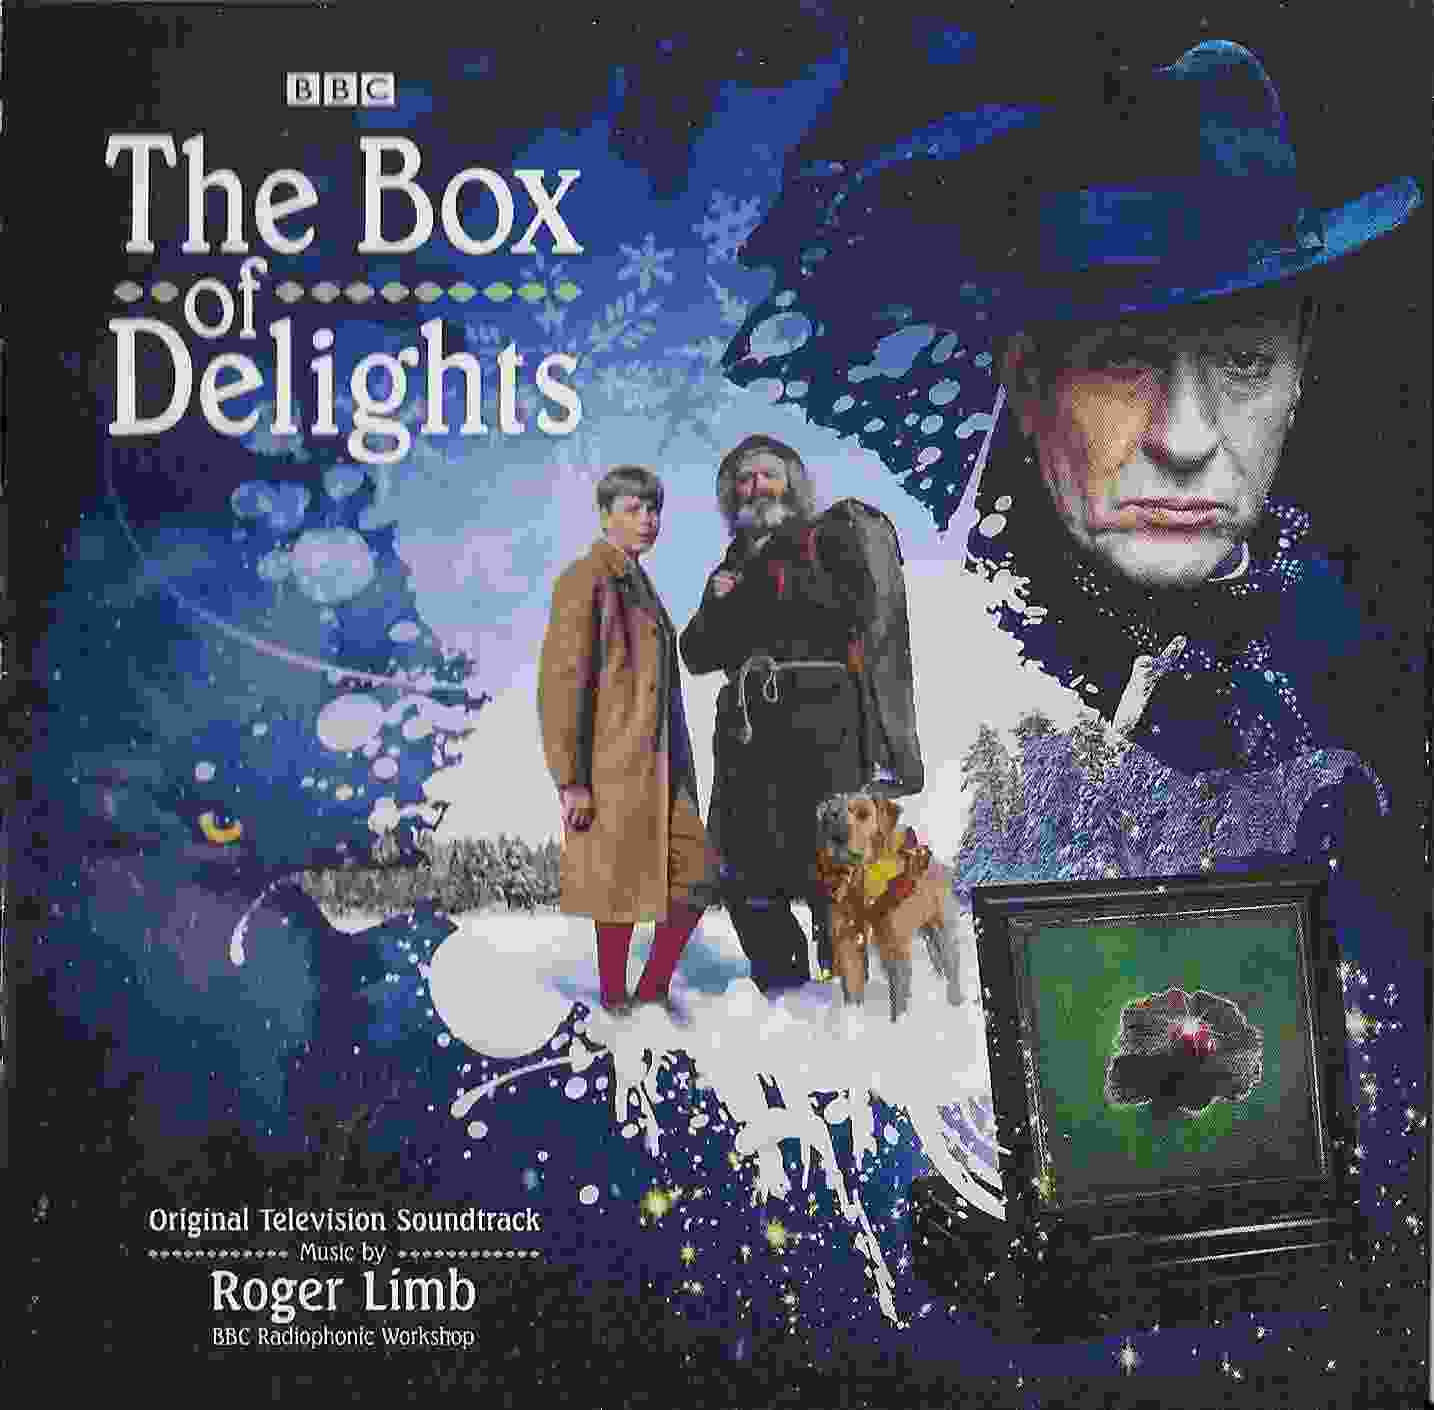 Picture of The box of delights by artist Roger Limb and the BBC Radiophonic Workshop from the BBC cds - Records and Tapes library